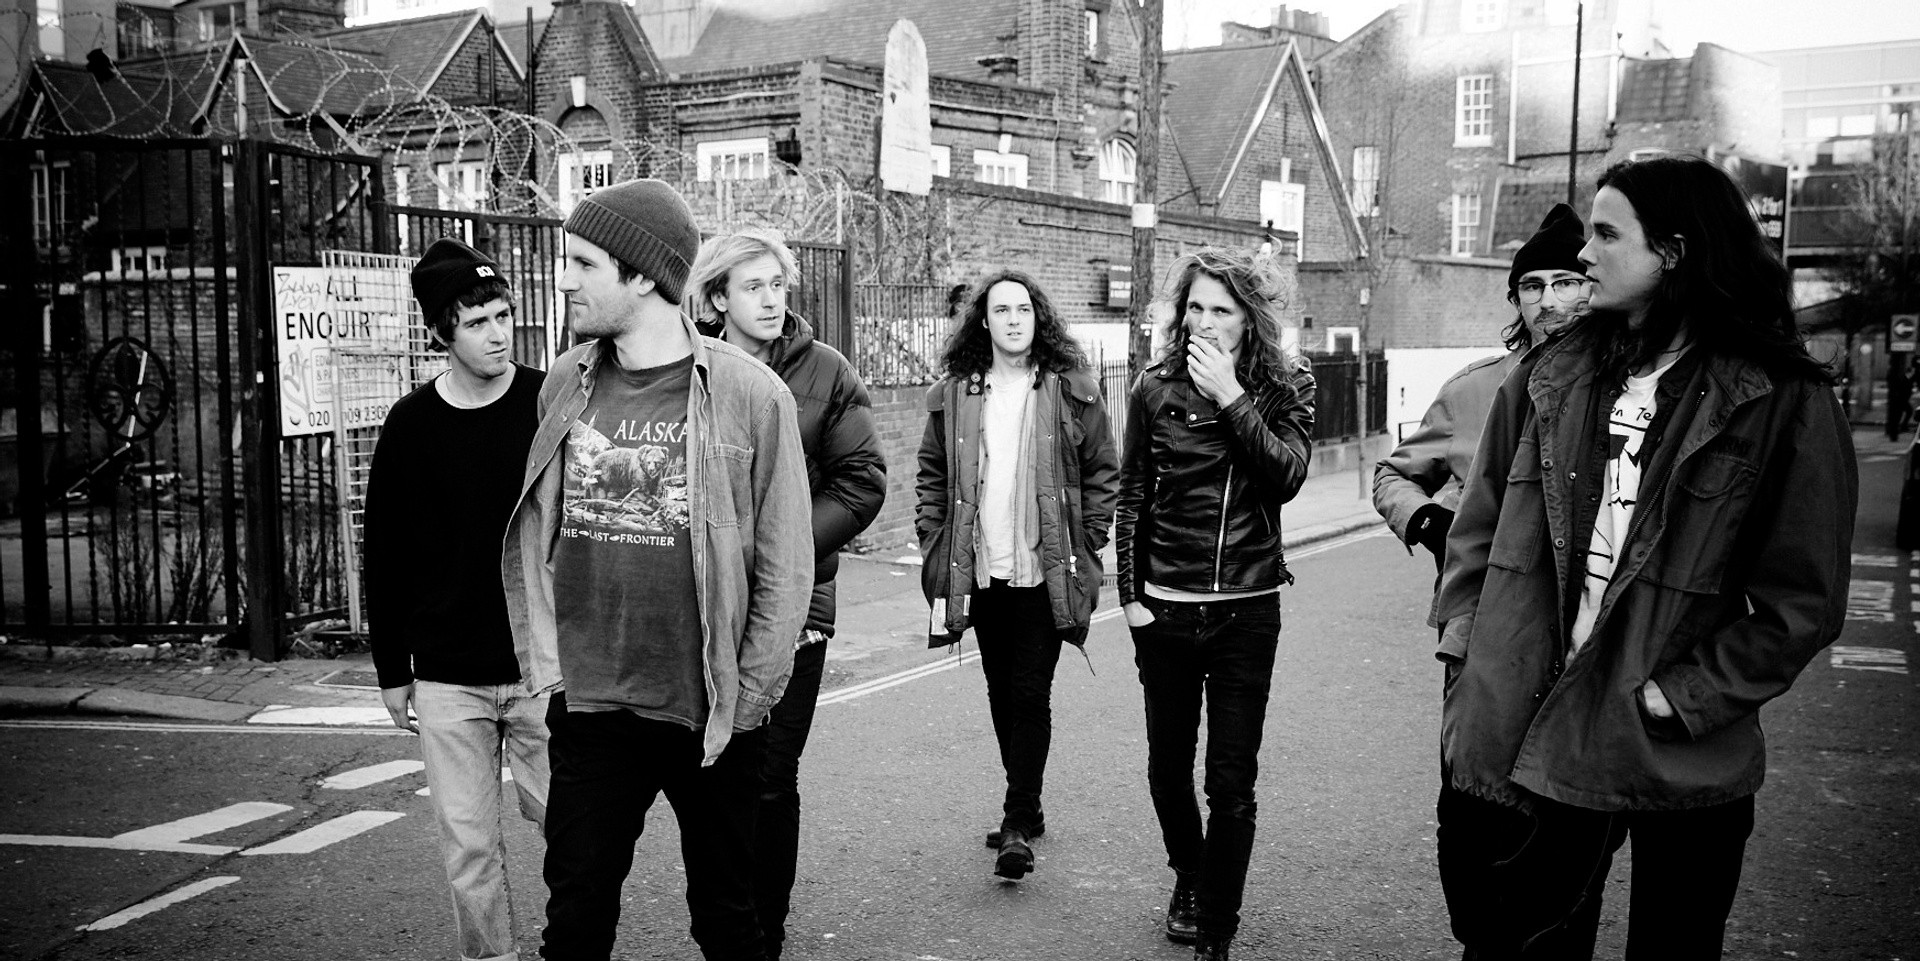 After releasing 5 albums in 2017, King Gizzard & The Lizard Wizard will put out a new album this year